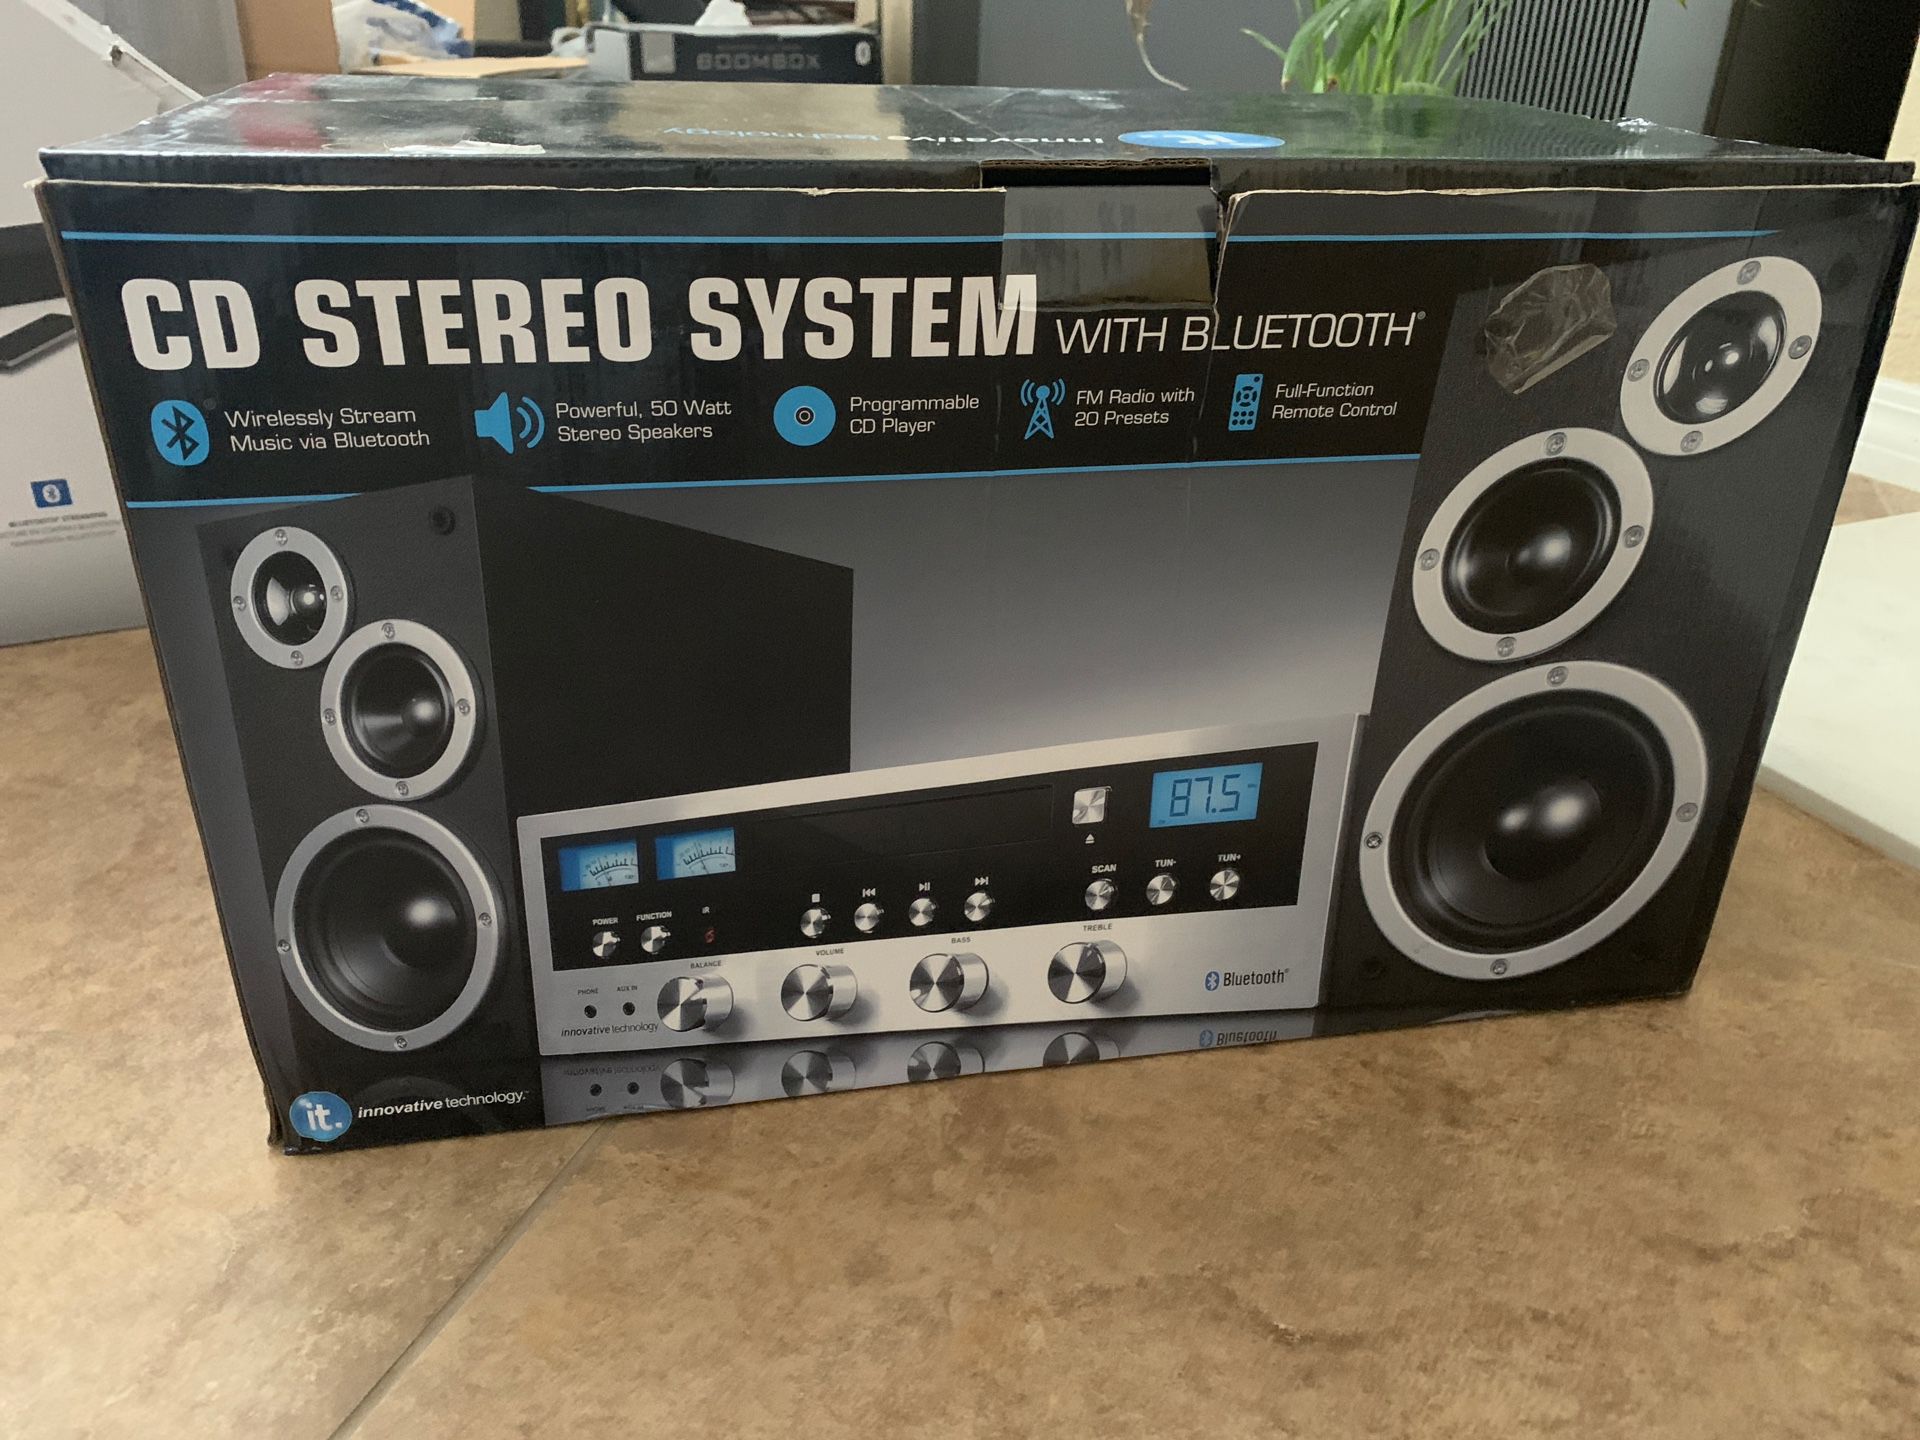 Classic CD Stereo System w/ Bluetooth